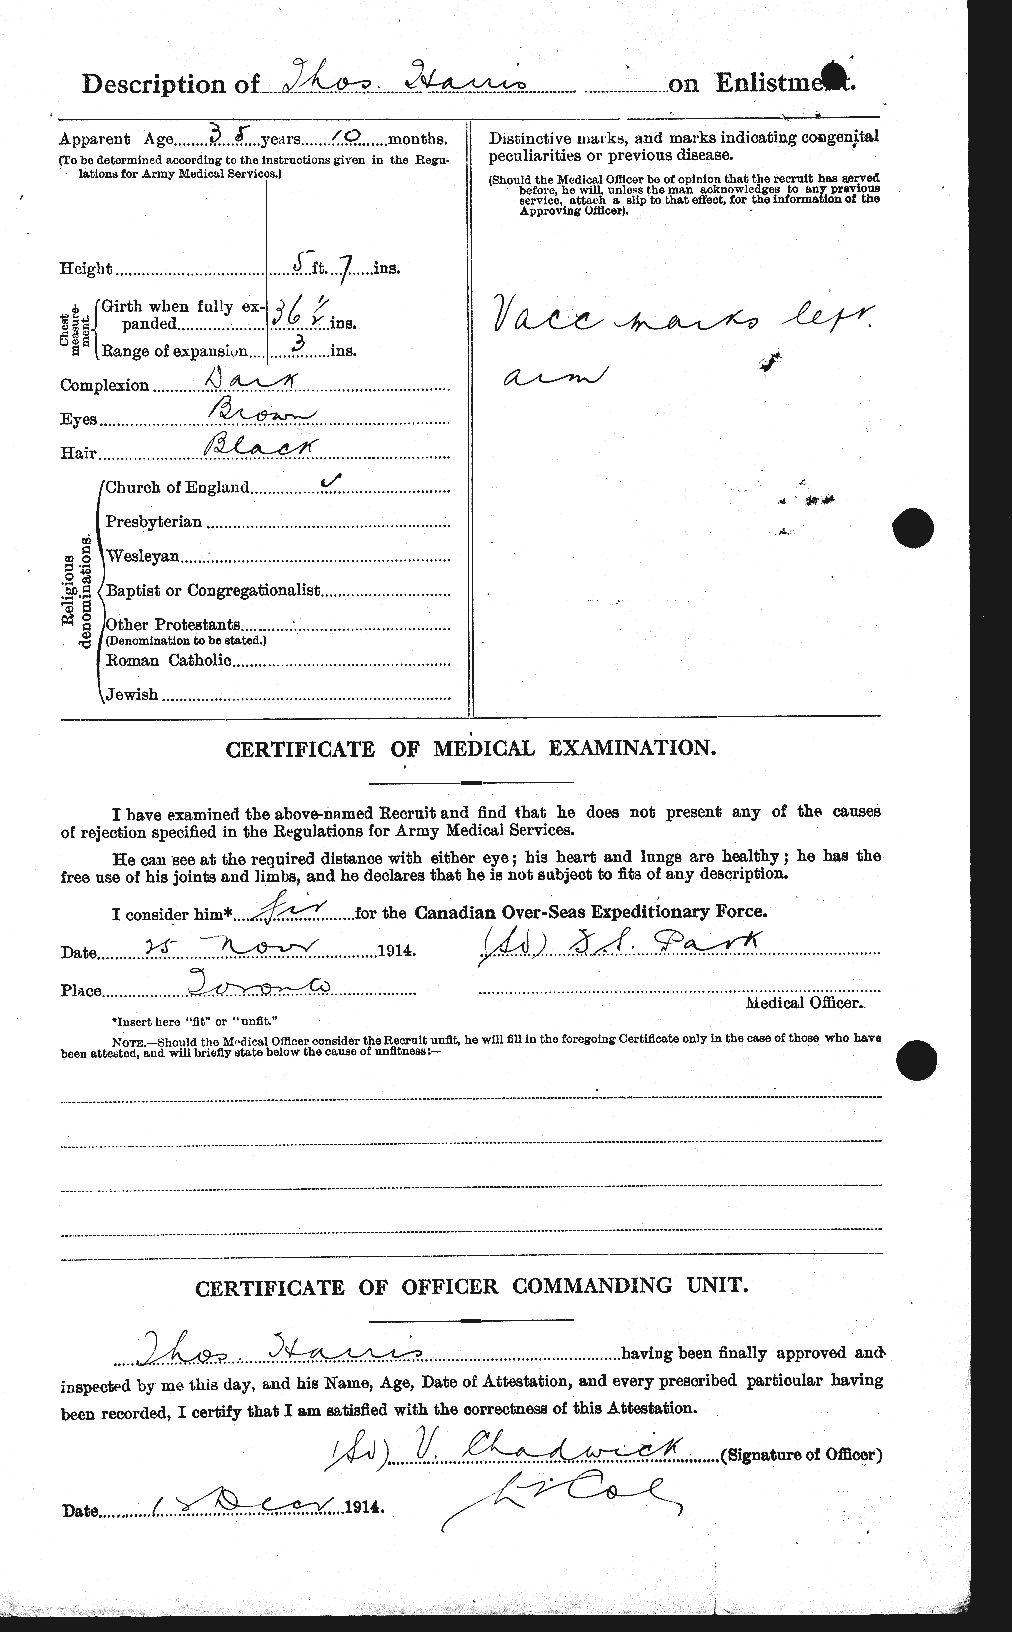 Personnel Records of the First World War - CEF 378233b